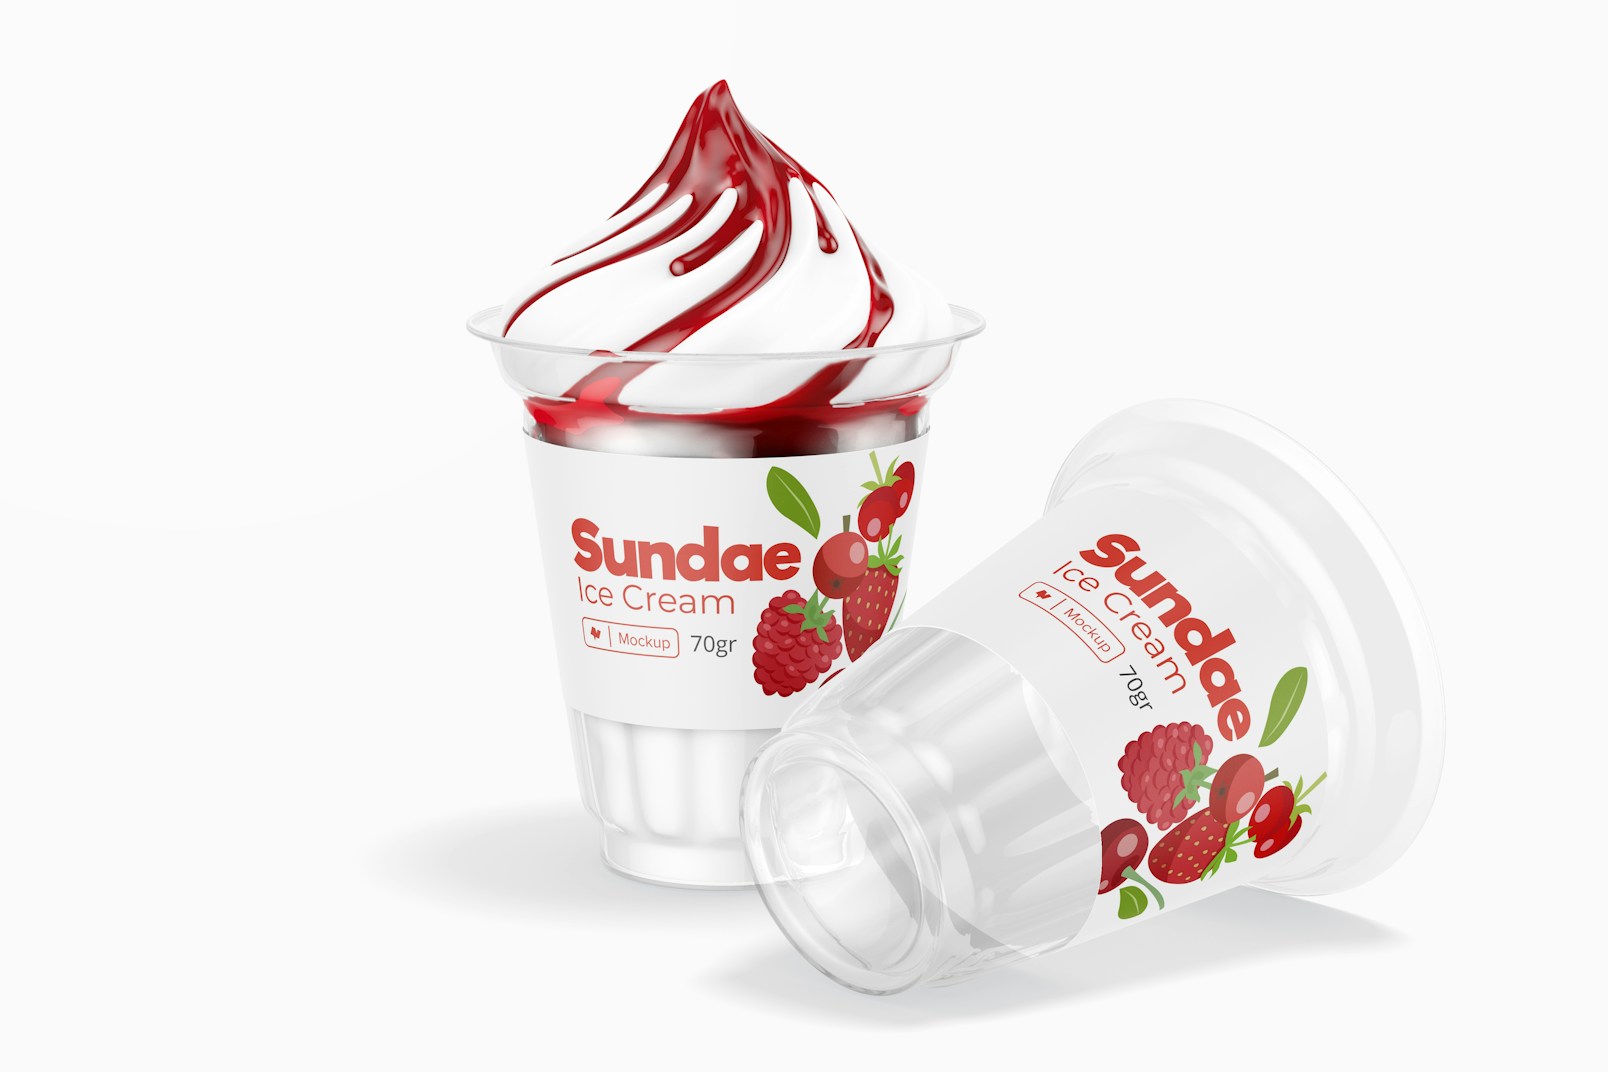 Sundae Ice Cream Cup Mockup, Standing and Dropped